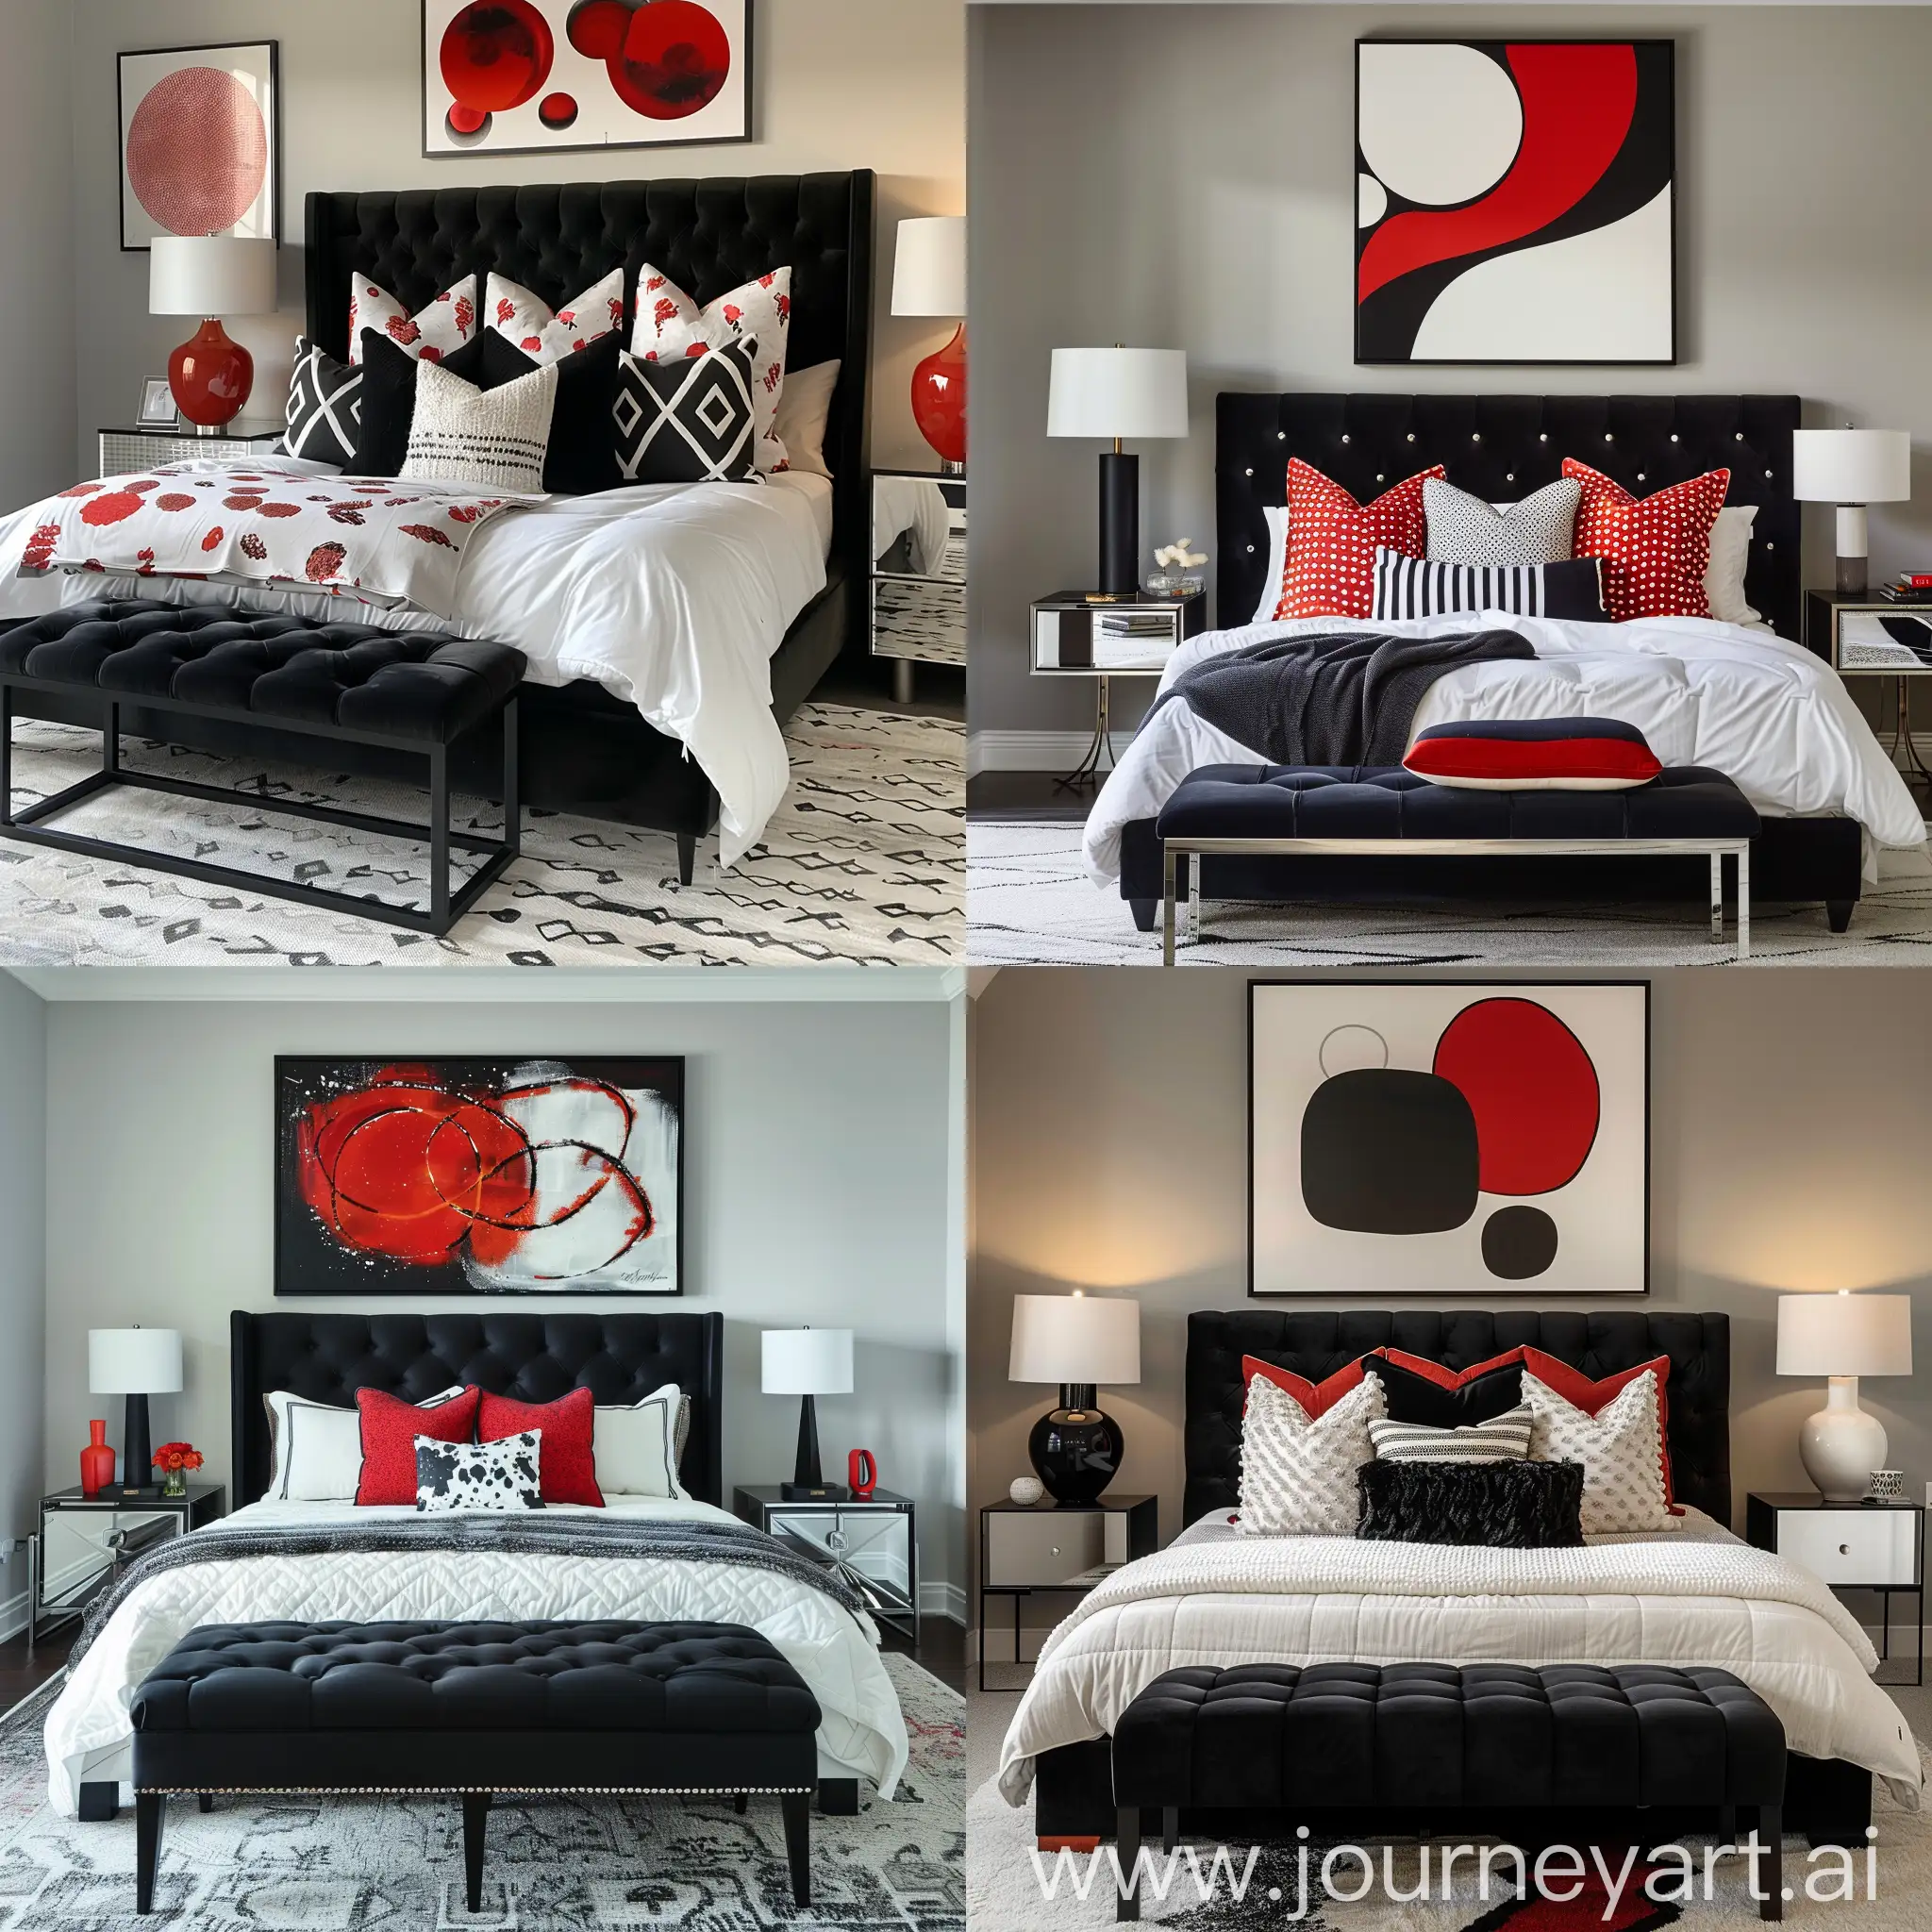 Contemporary-Bedroom-Interior-with-Black-Tufted-Headboard-and-Abstract-Art